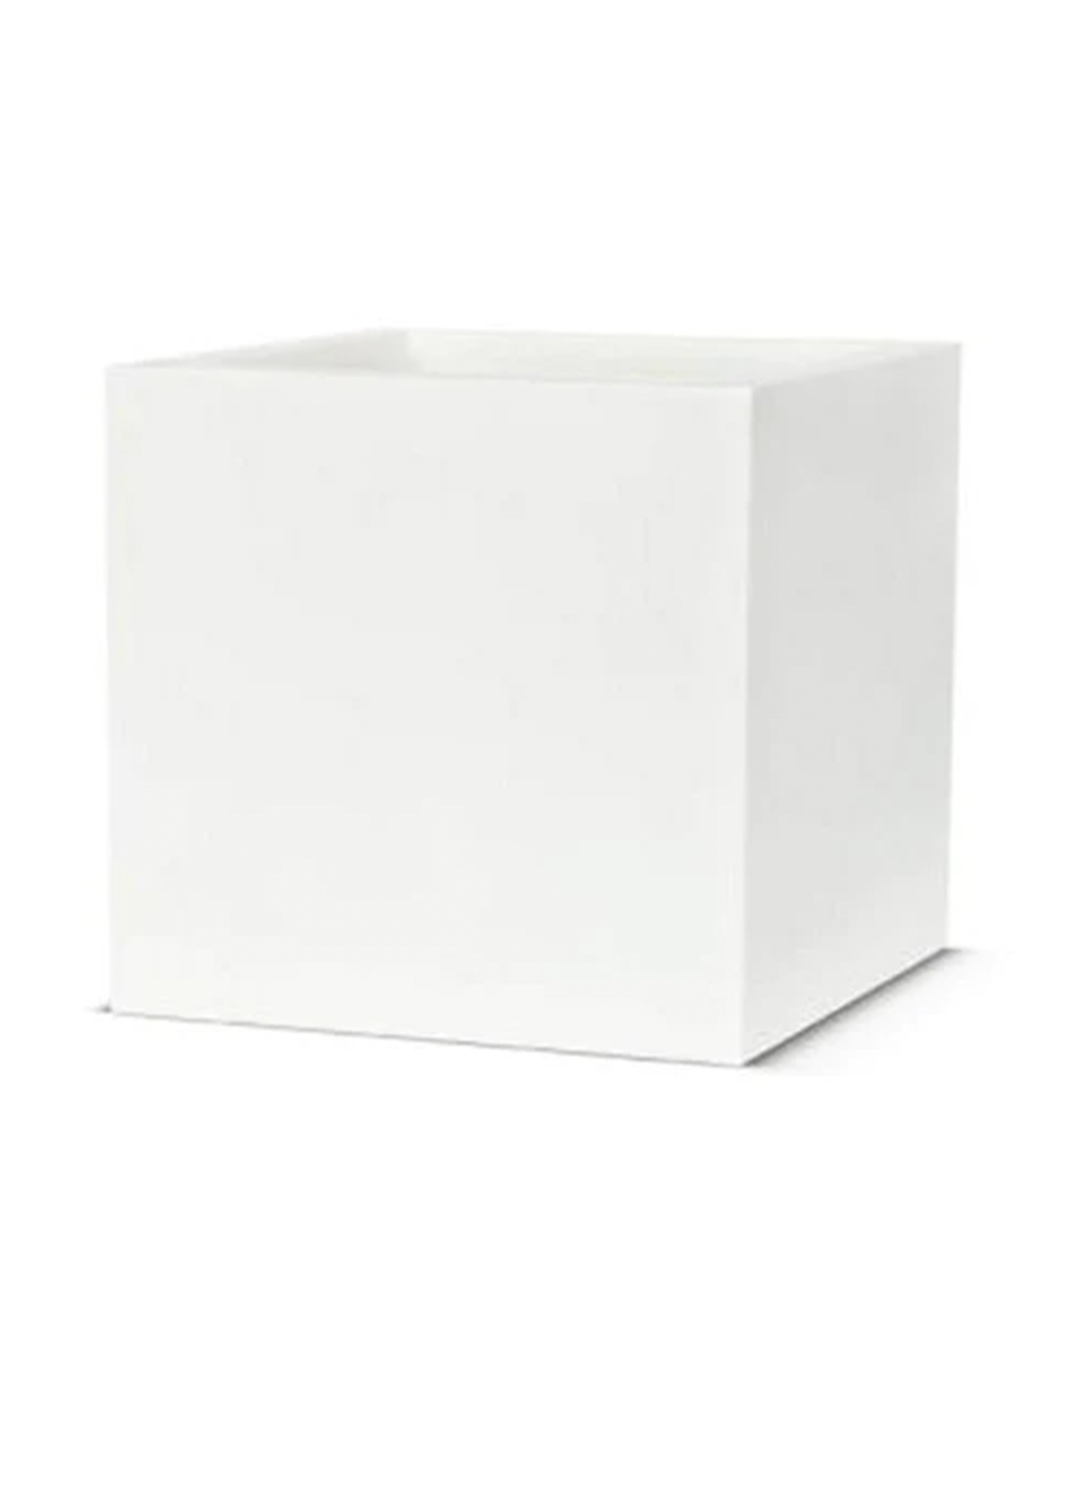 Square GRP Pot Planter starting rate